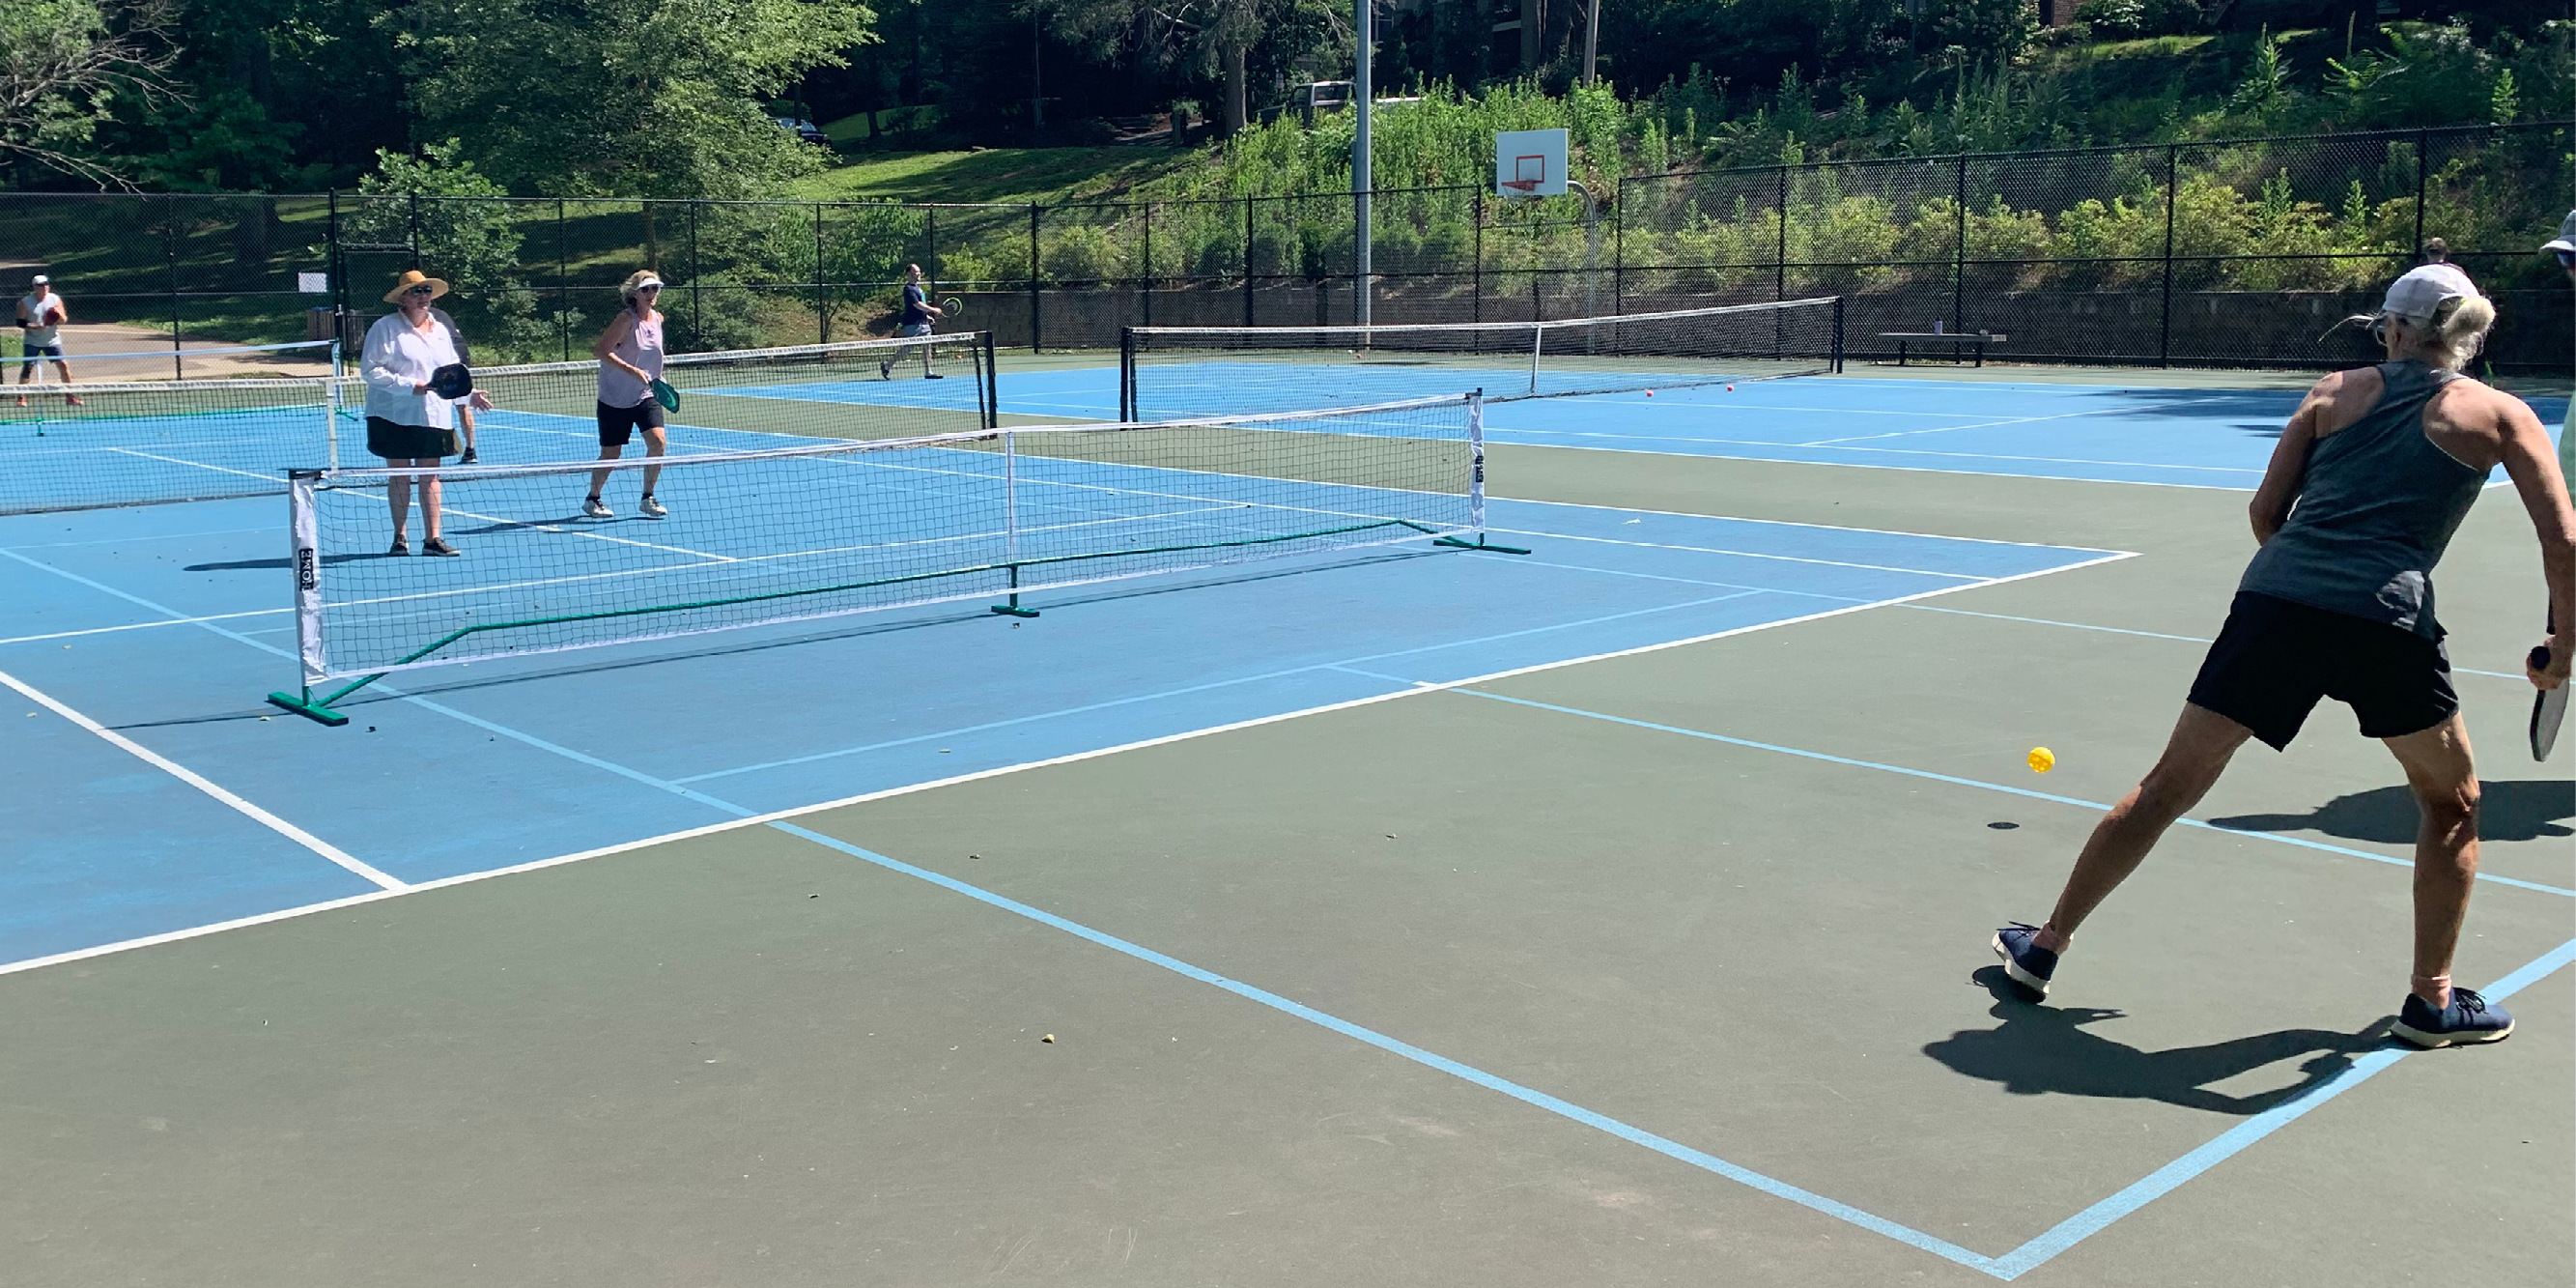 Dual lines added at public outdoor racquet sports courts, shared use schedule for pickleball and tennis begins March 13